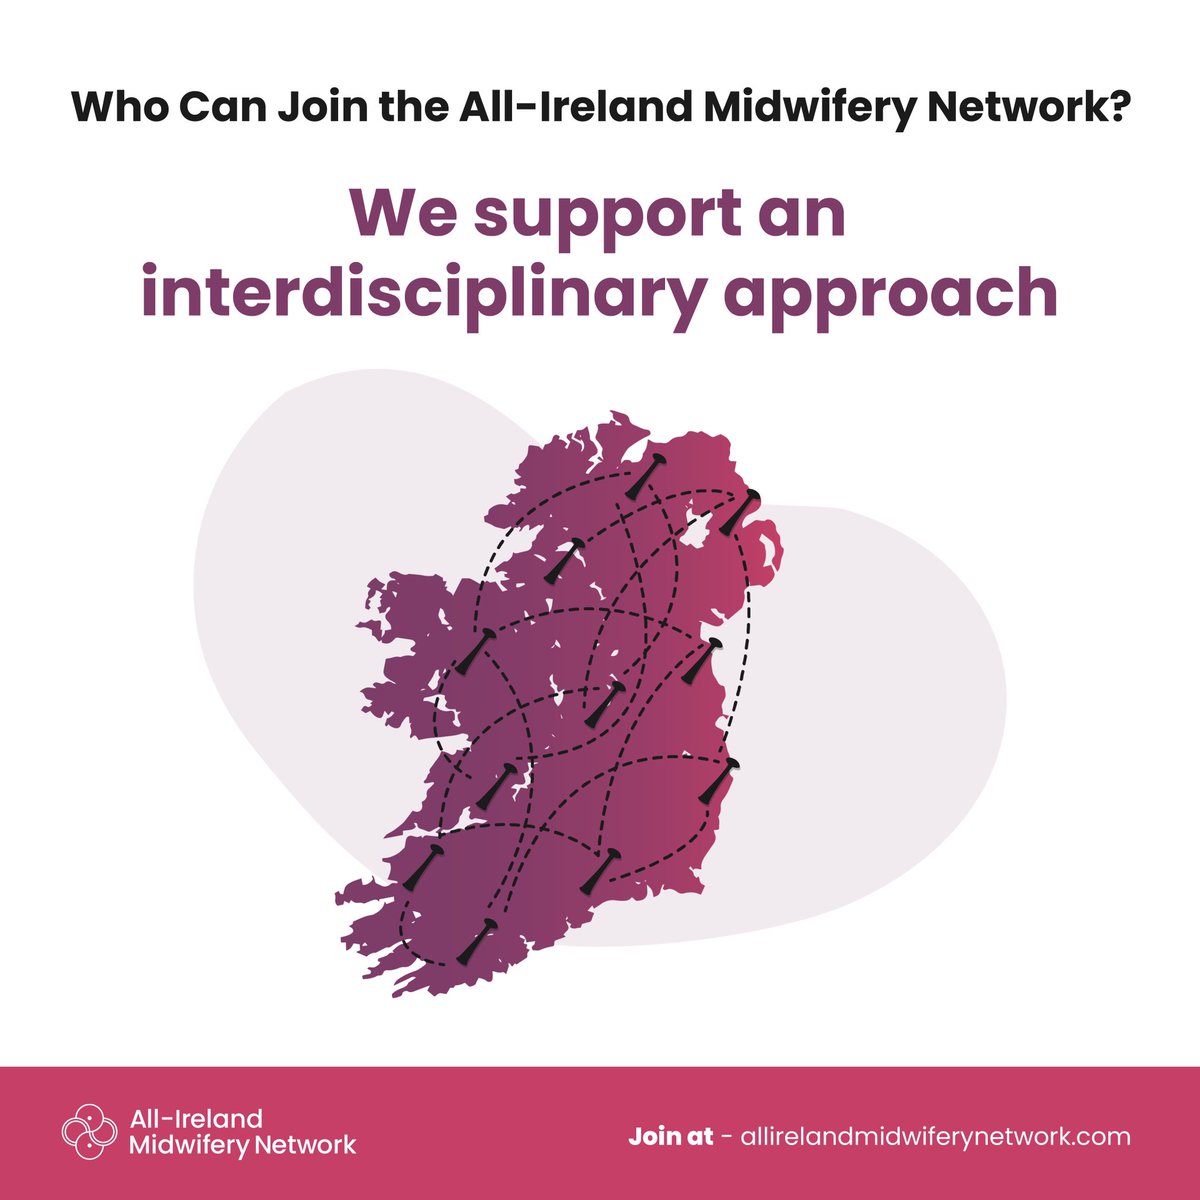 We encourage multiple disciplines to join our Community of Practice! 💜Midwives 💜Student Midwives 💜Maternity Care Providers 💜Obstetricians and NCHD Get involved and join for FREE today at: allirelandmidwiferynetwork.com #AIMN #communityofpractice #evidencebased